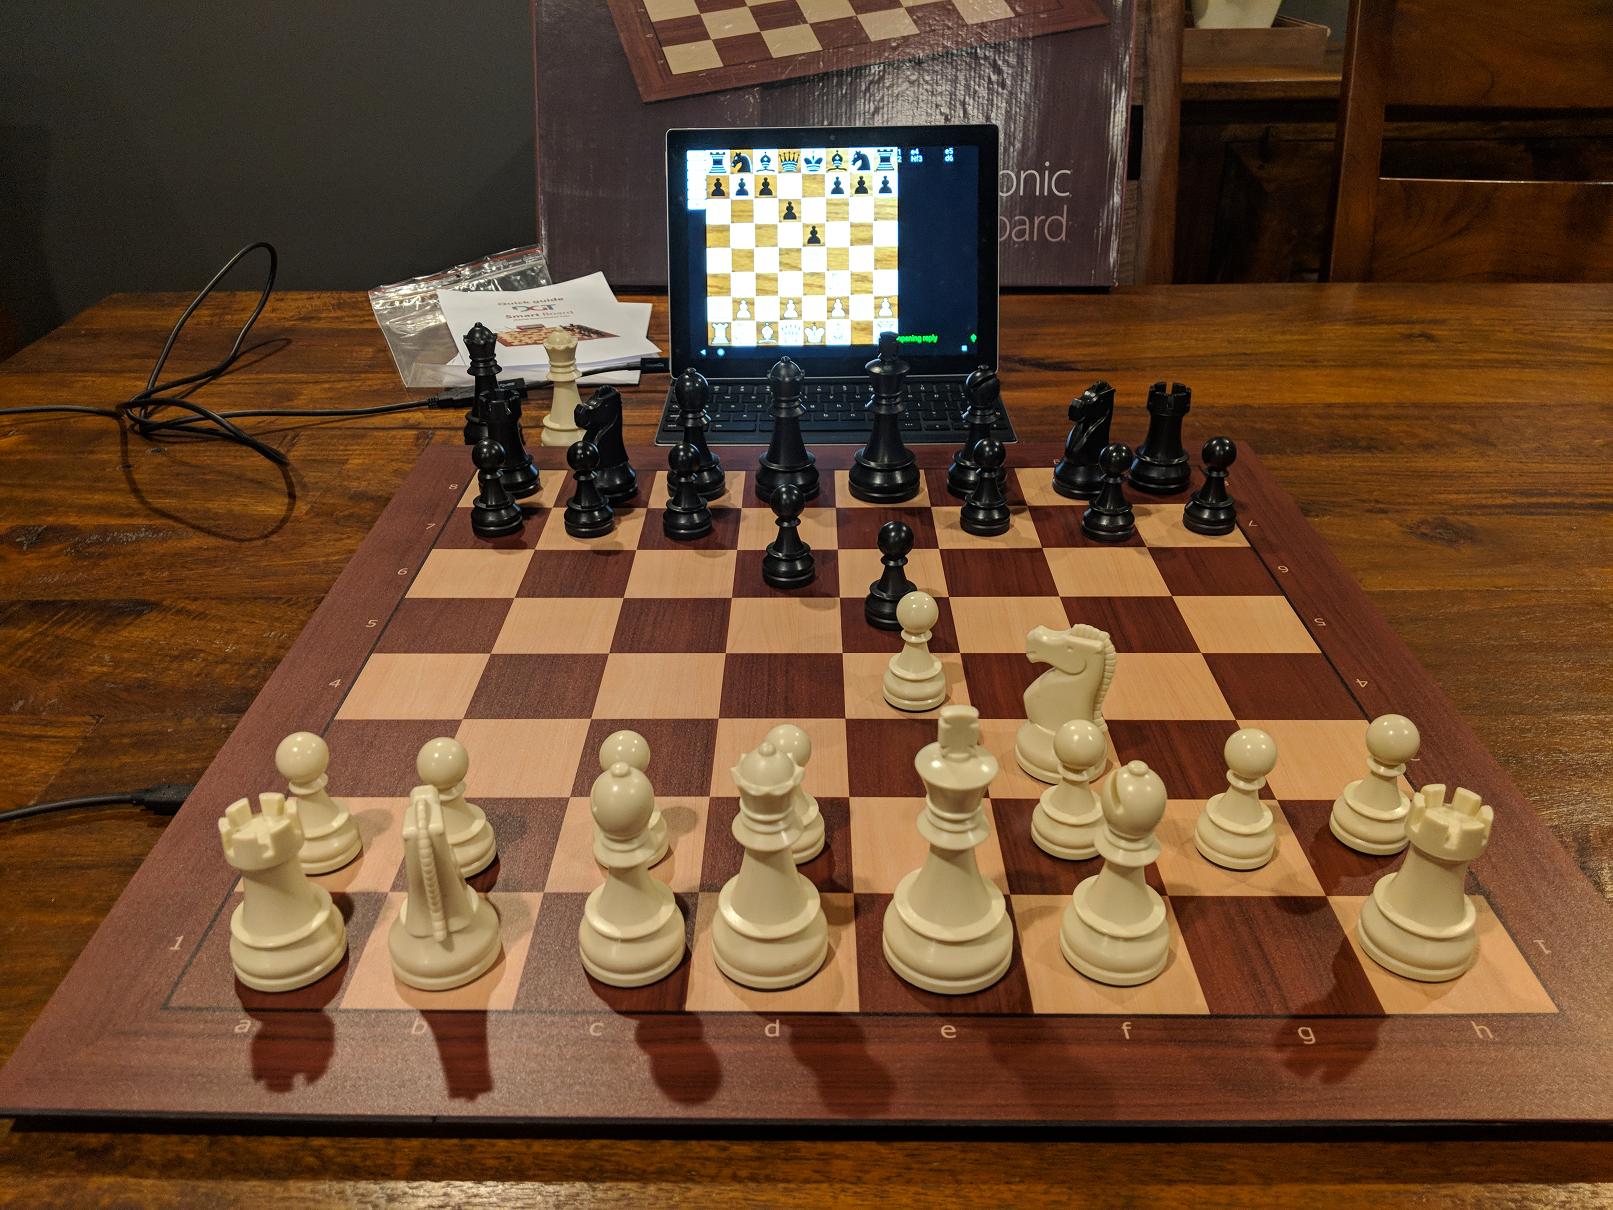 Play on Lichess using a DGT board